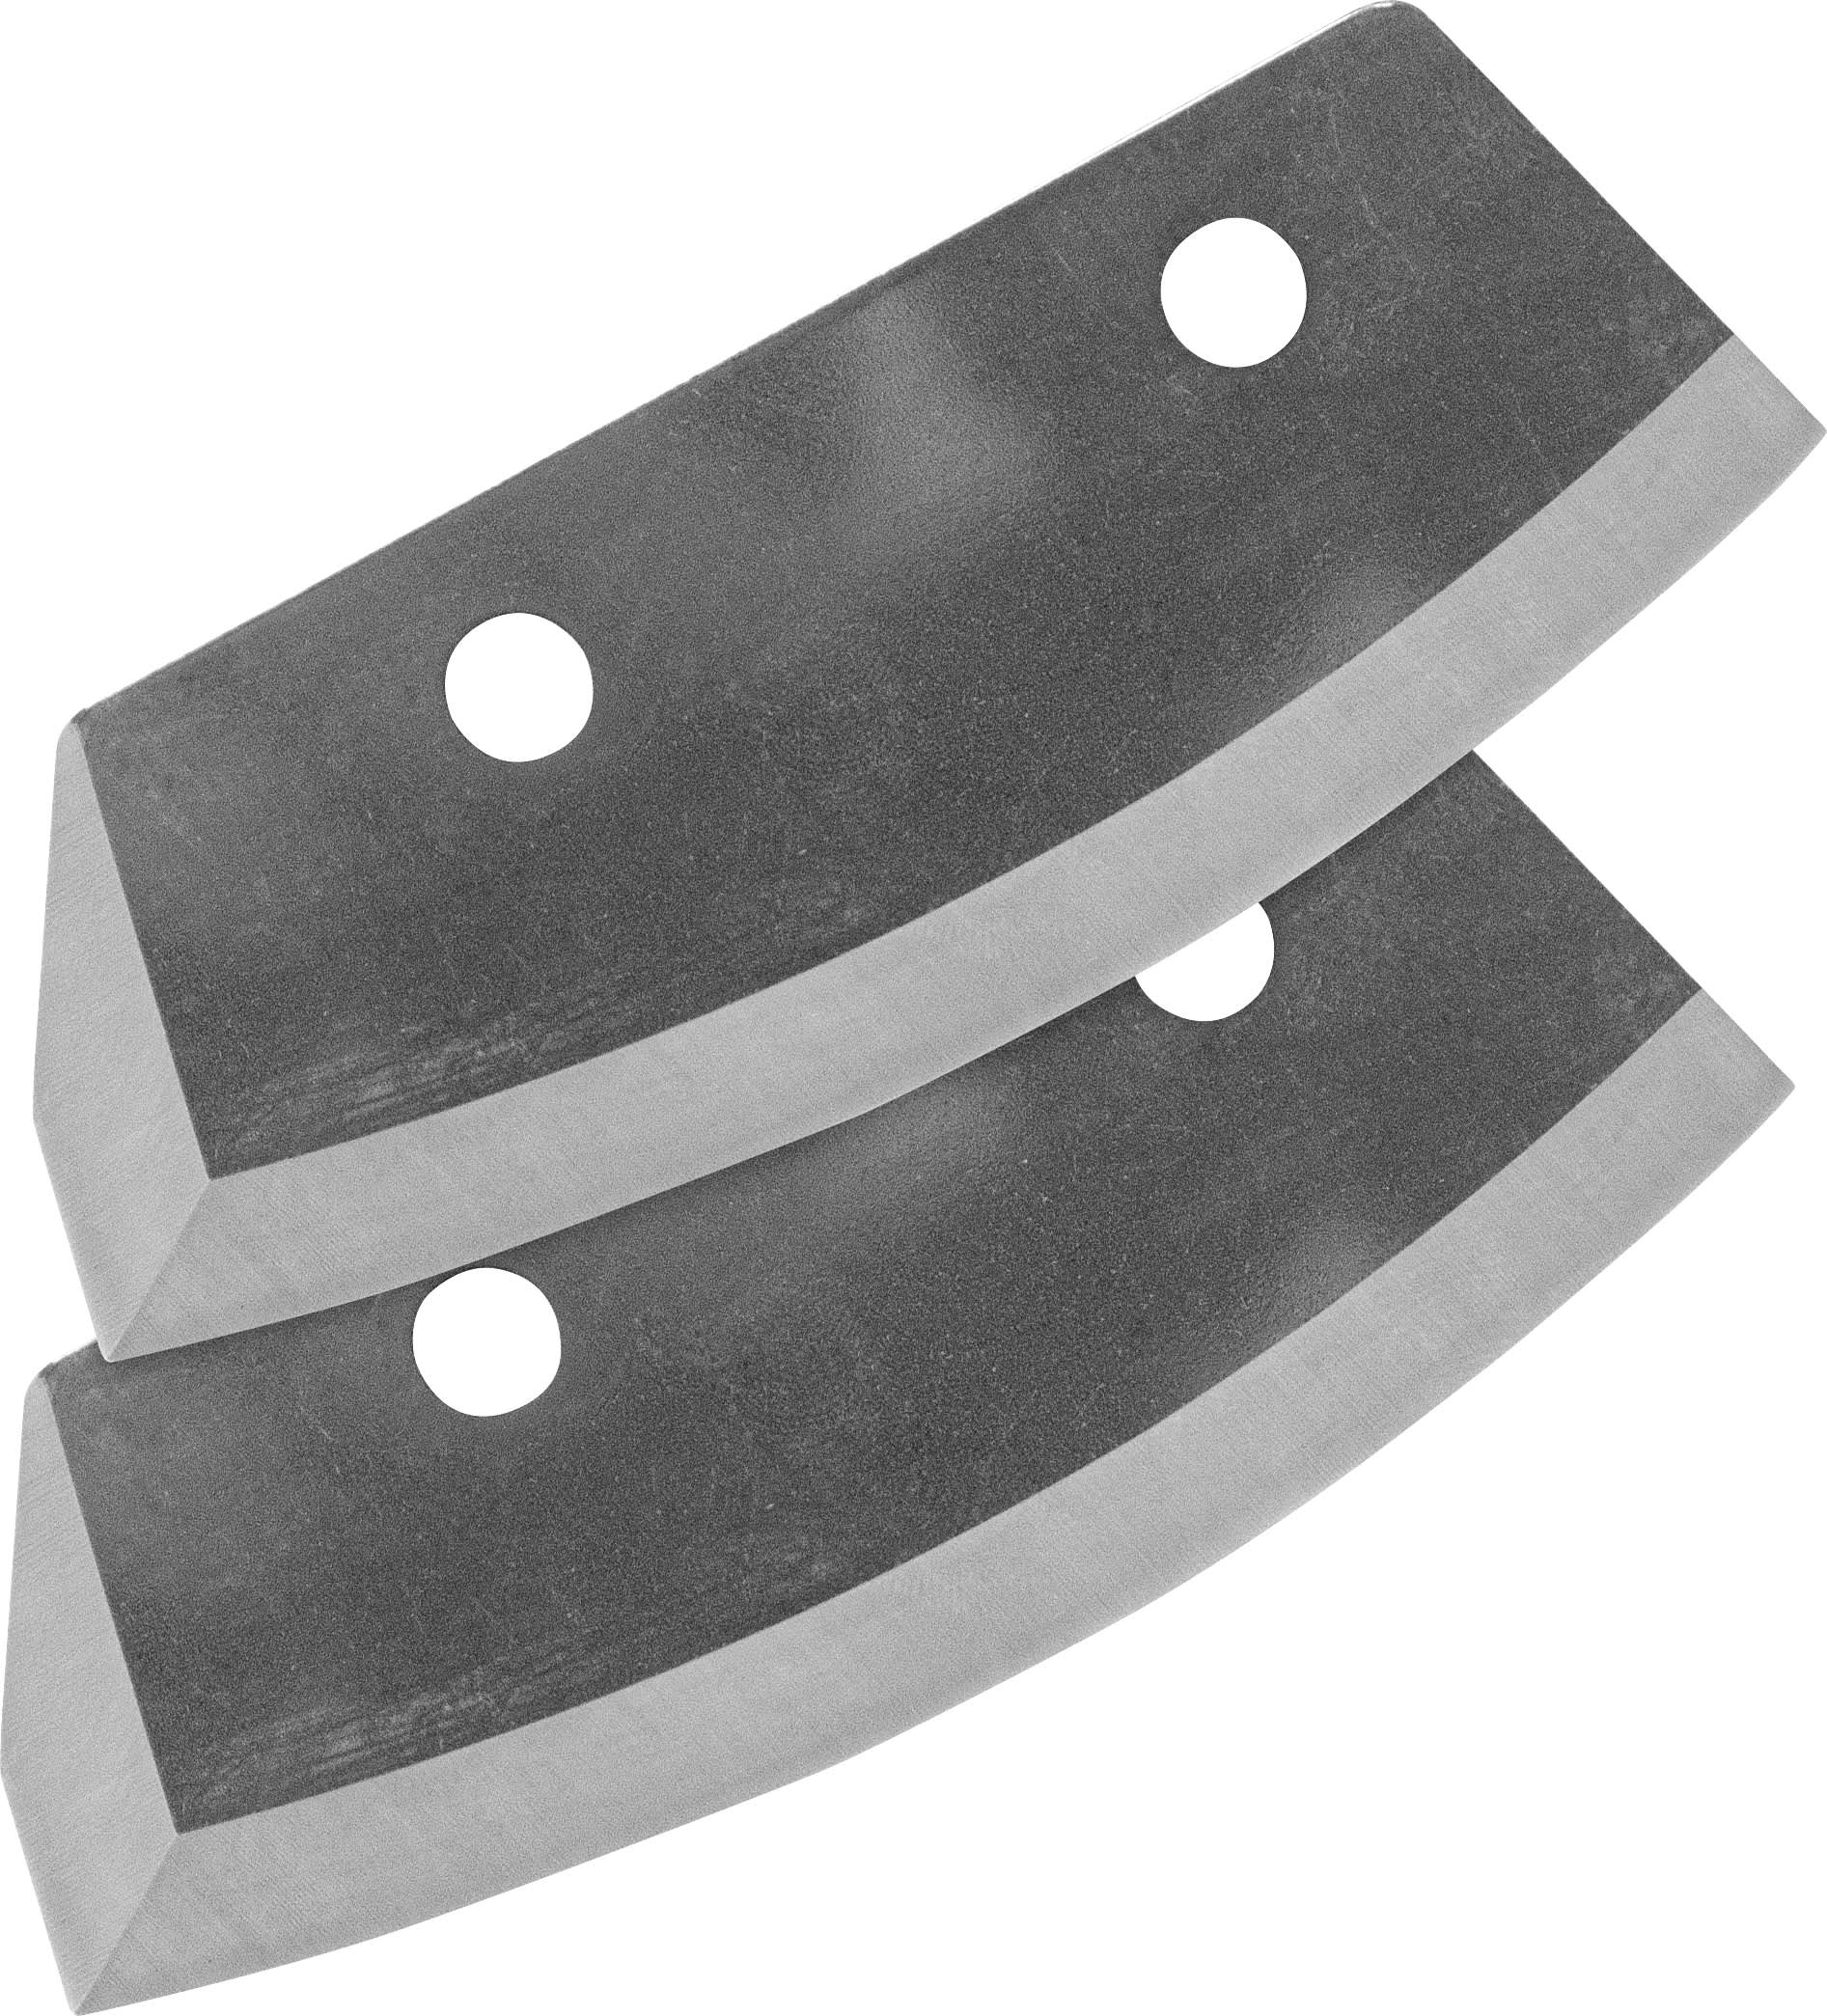 8 Jiffy Ice Auger Replacement Blade Part # 3538 / 1801 Jiffy Ice Auger  Replacement Blade Part# 3538 [Jiffy051] - $42.99 : OK Hardware & Rental,  Online Store